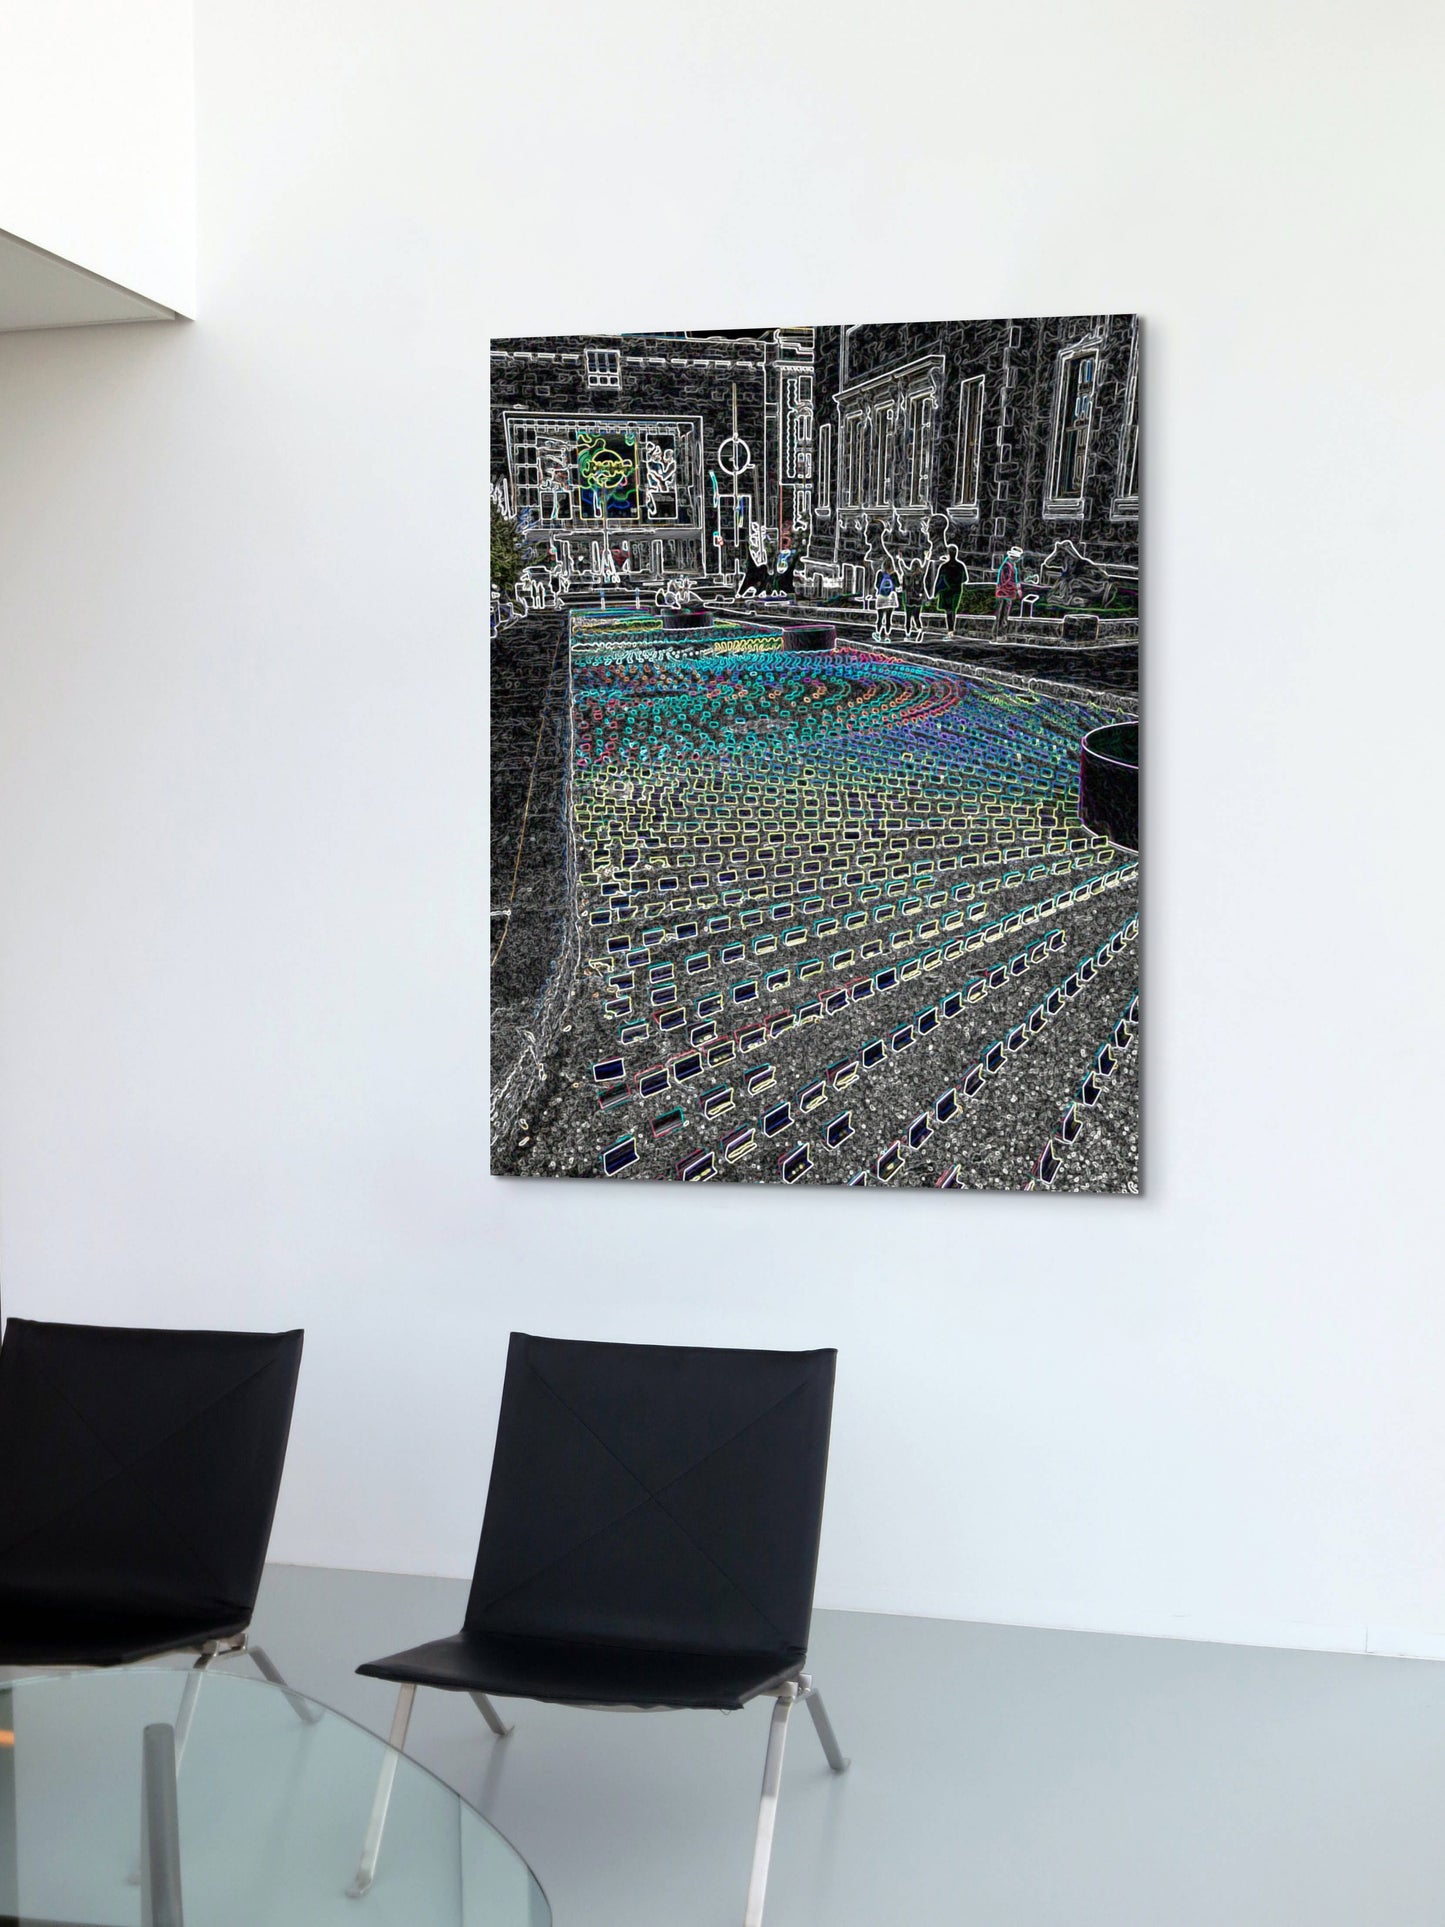 Neon Street Art Canvas Wall Art in office foyer with white walls and two black chairs